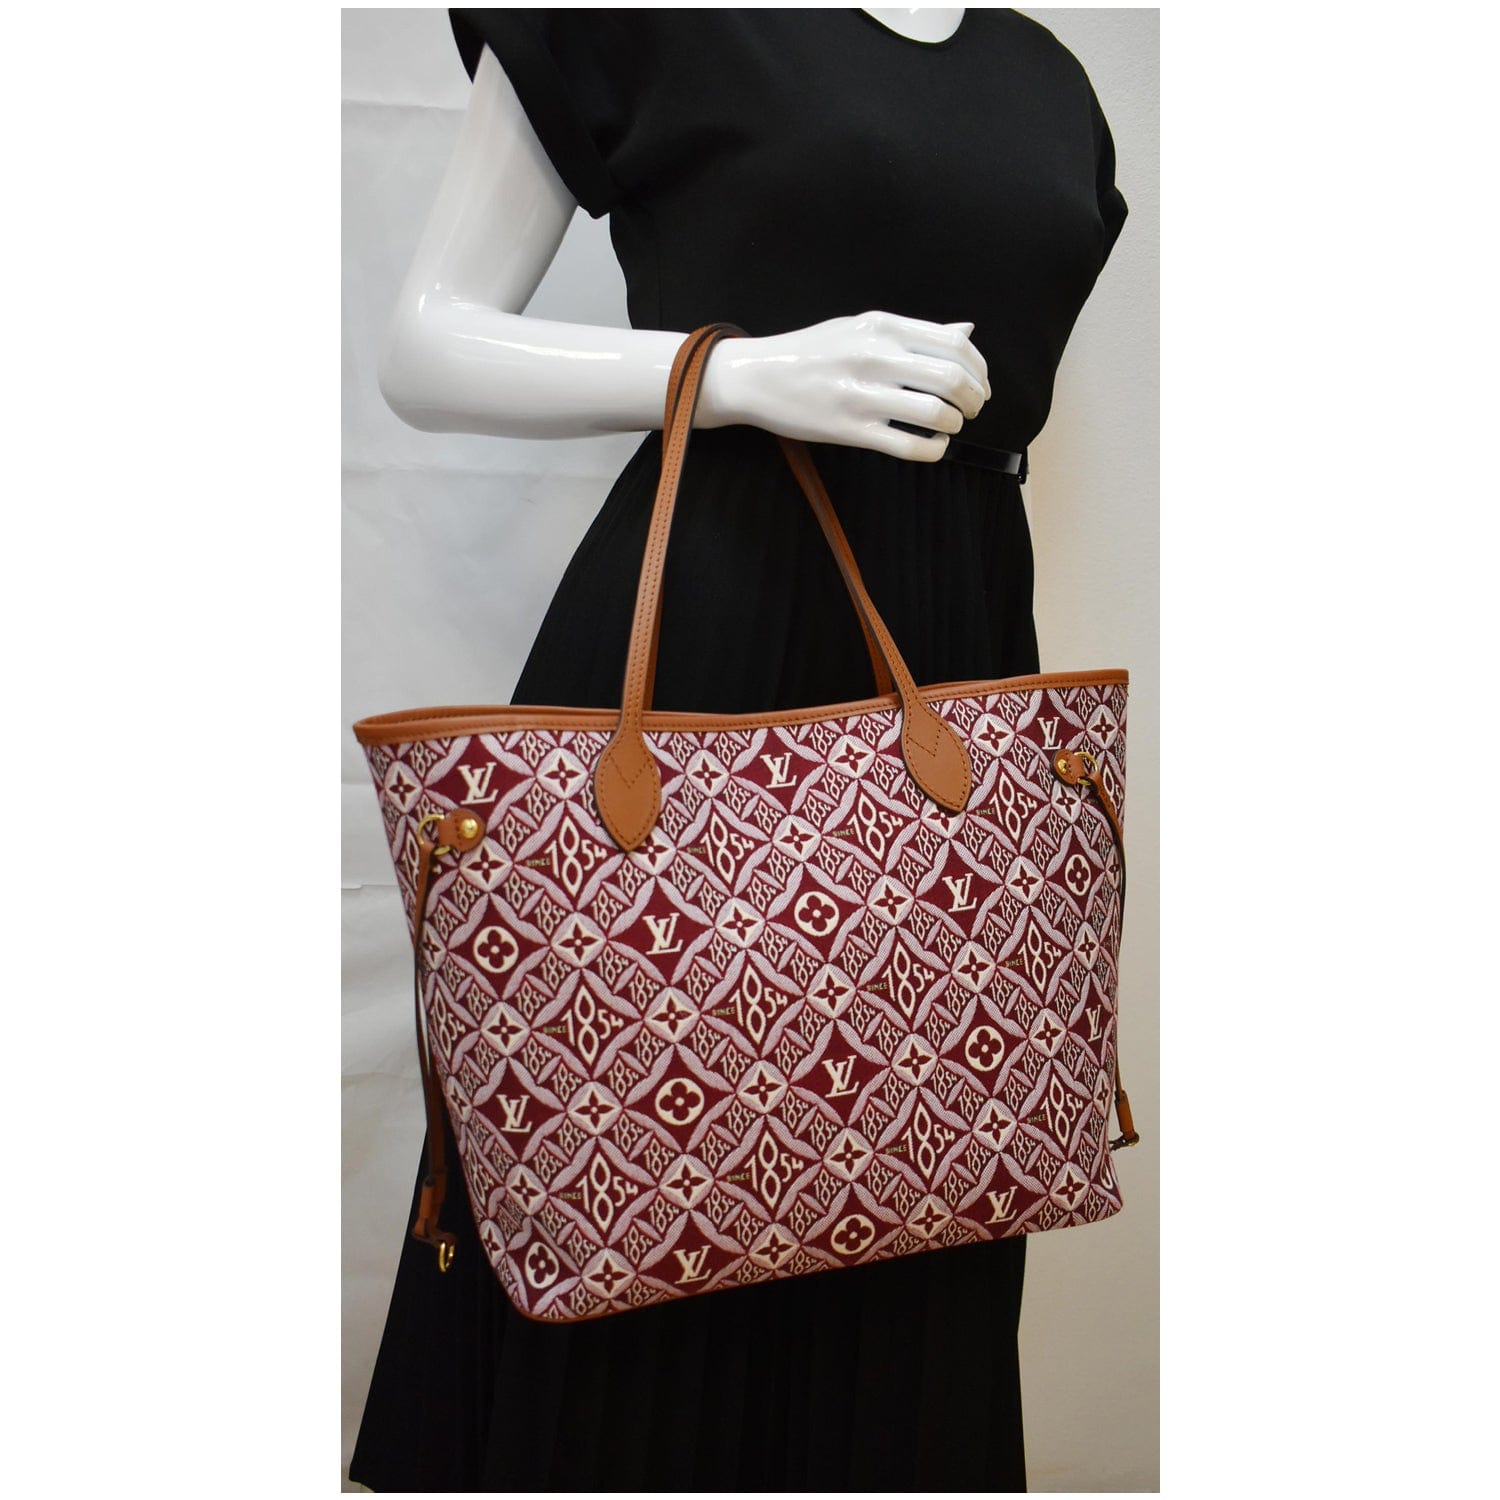 Louis Vuitton Neverfull Since 1854 - 4 For Sale on 1stDibs